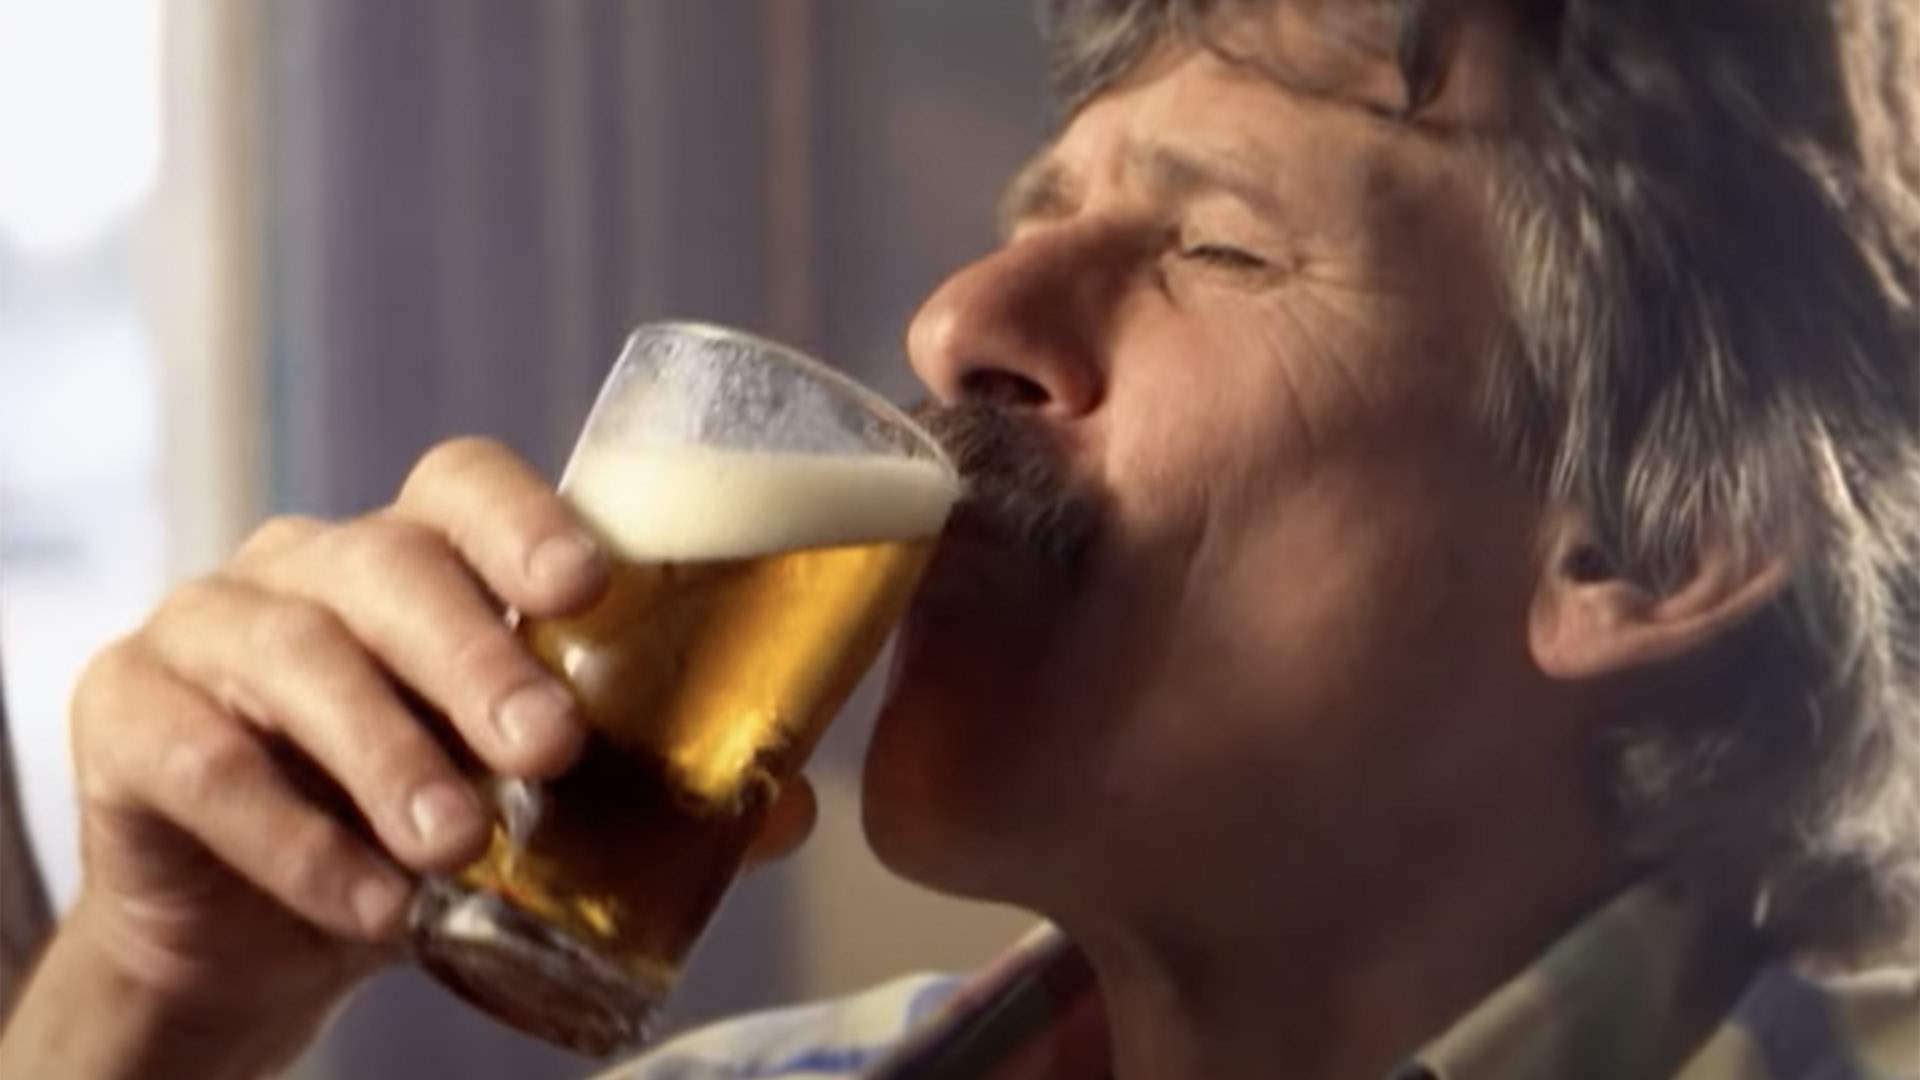 VB Has Released a New Riff On Its Classic "Hard-Earned Thirst" Ad to Encourage Getting the Jab